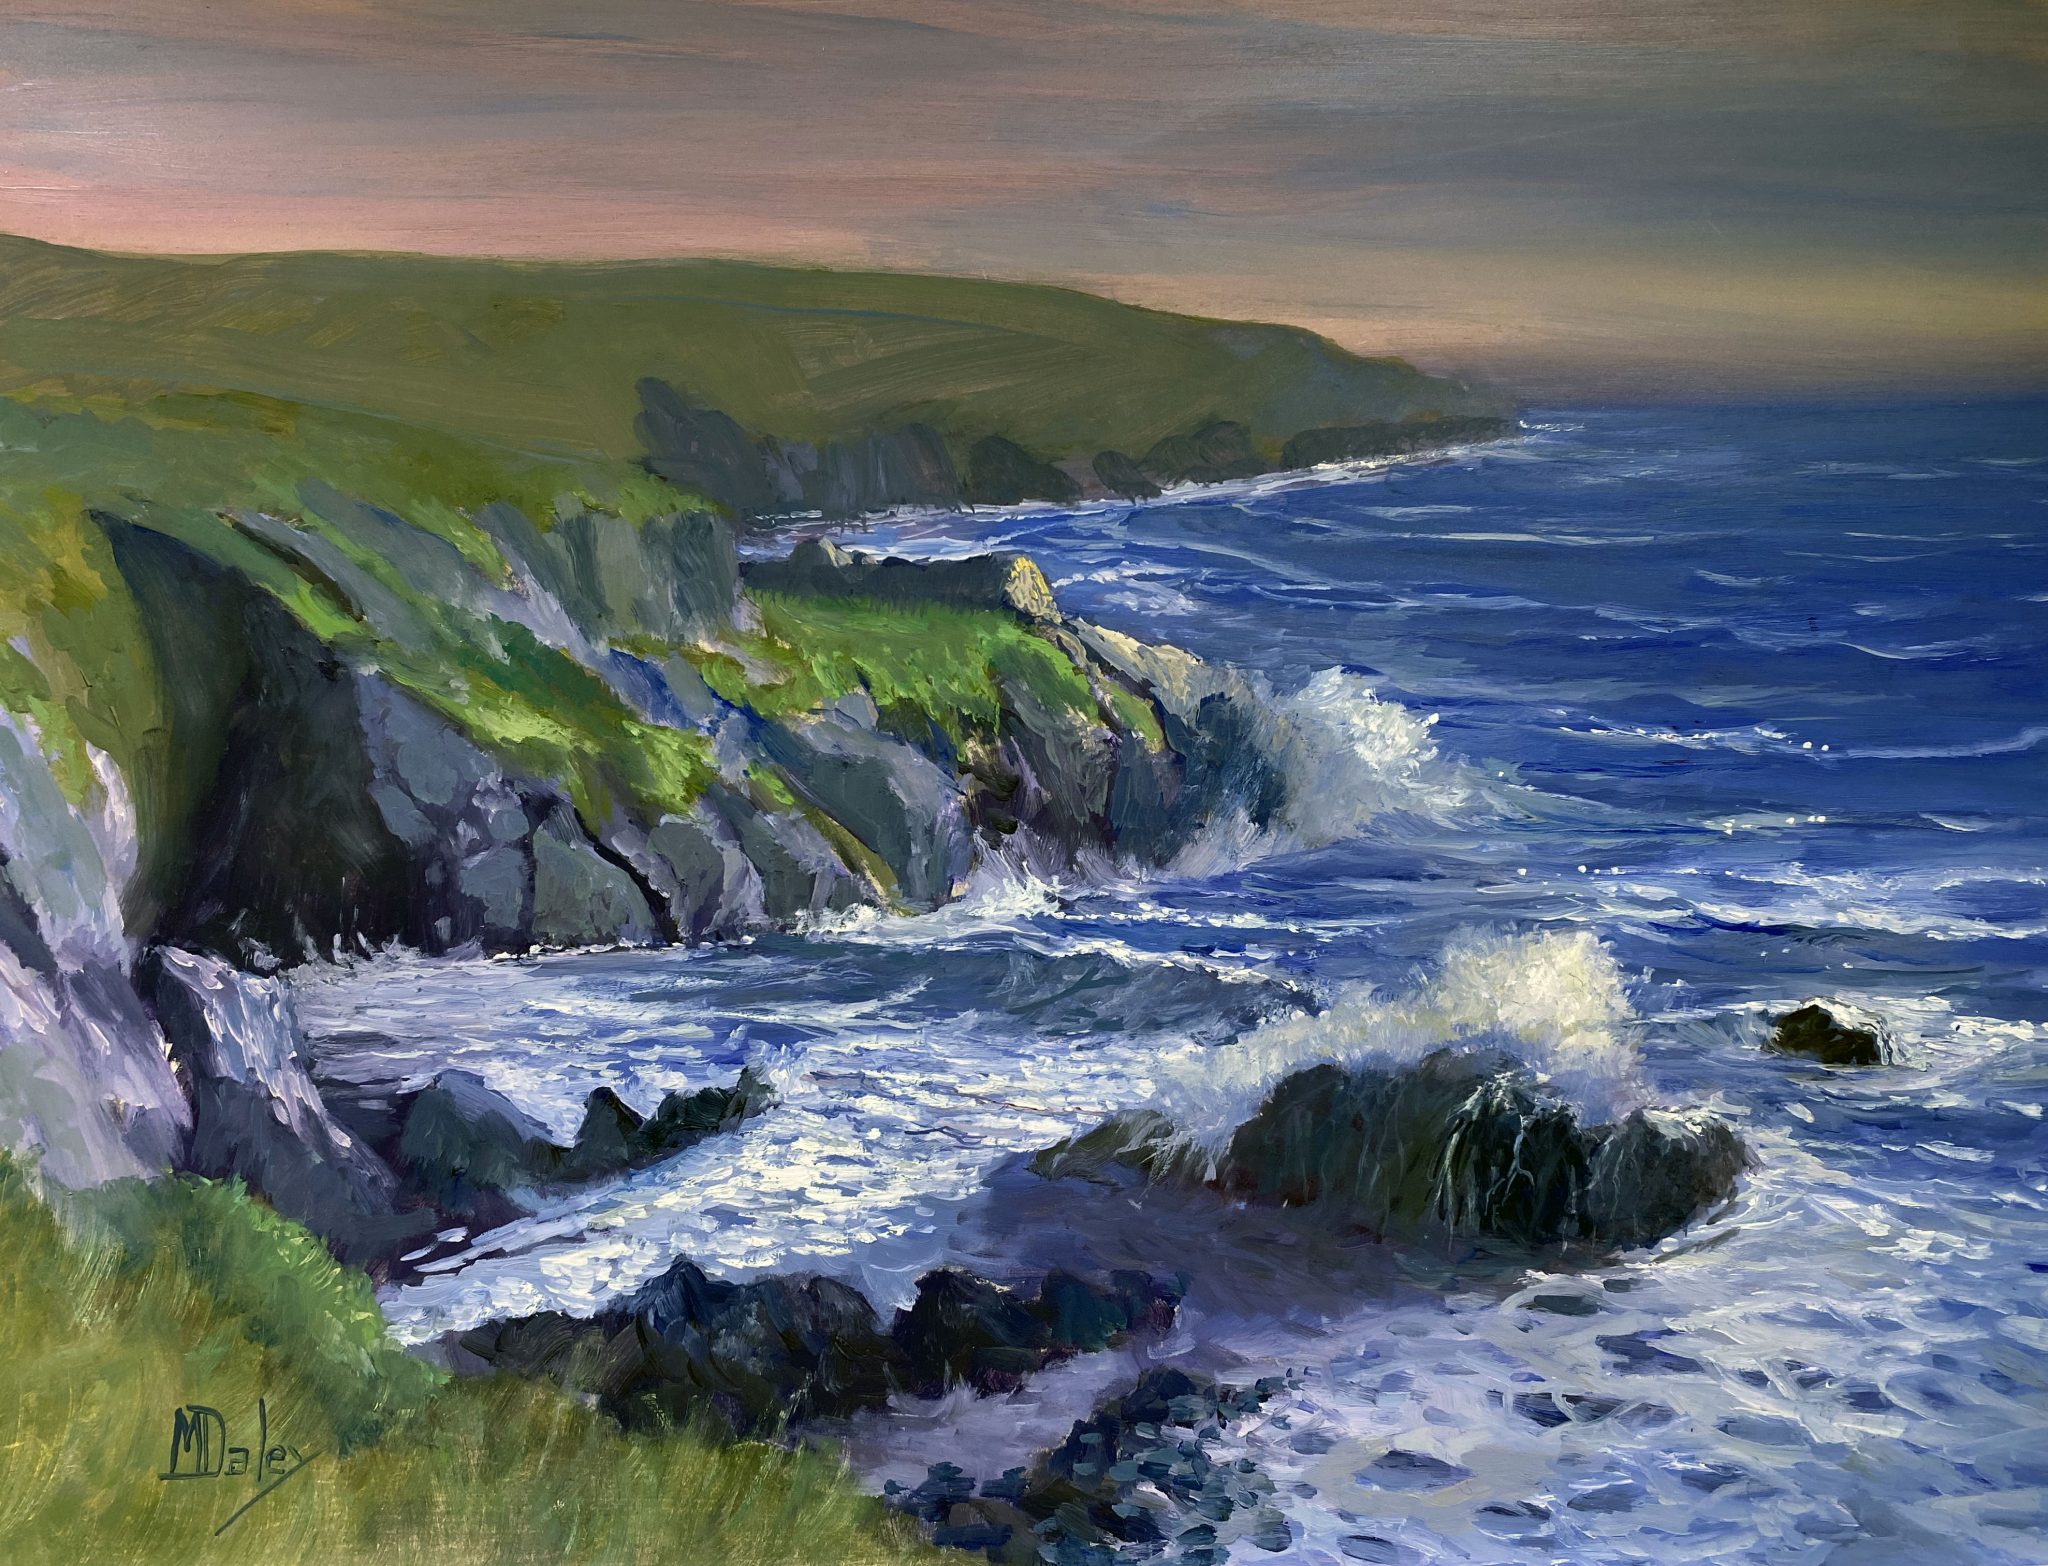 Cornish Seascape by artist Mike Daley